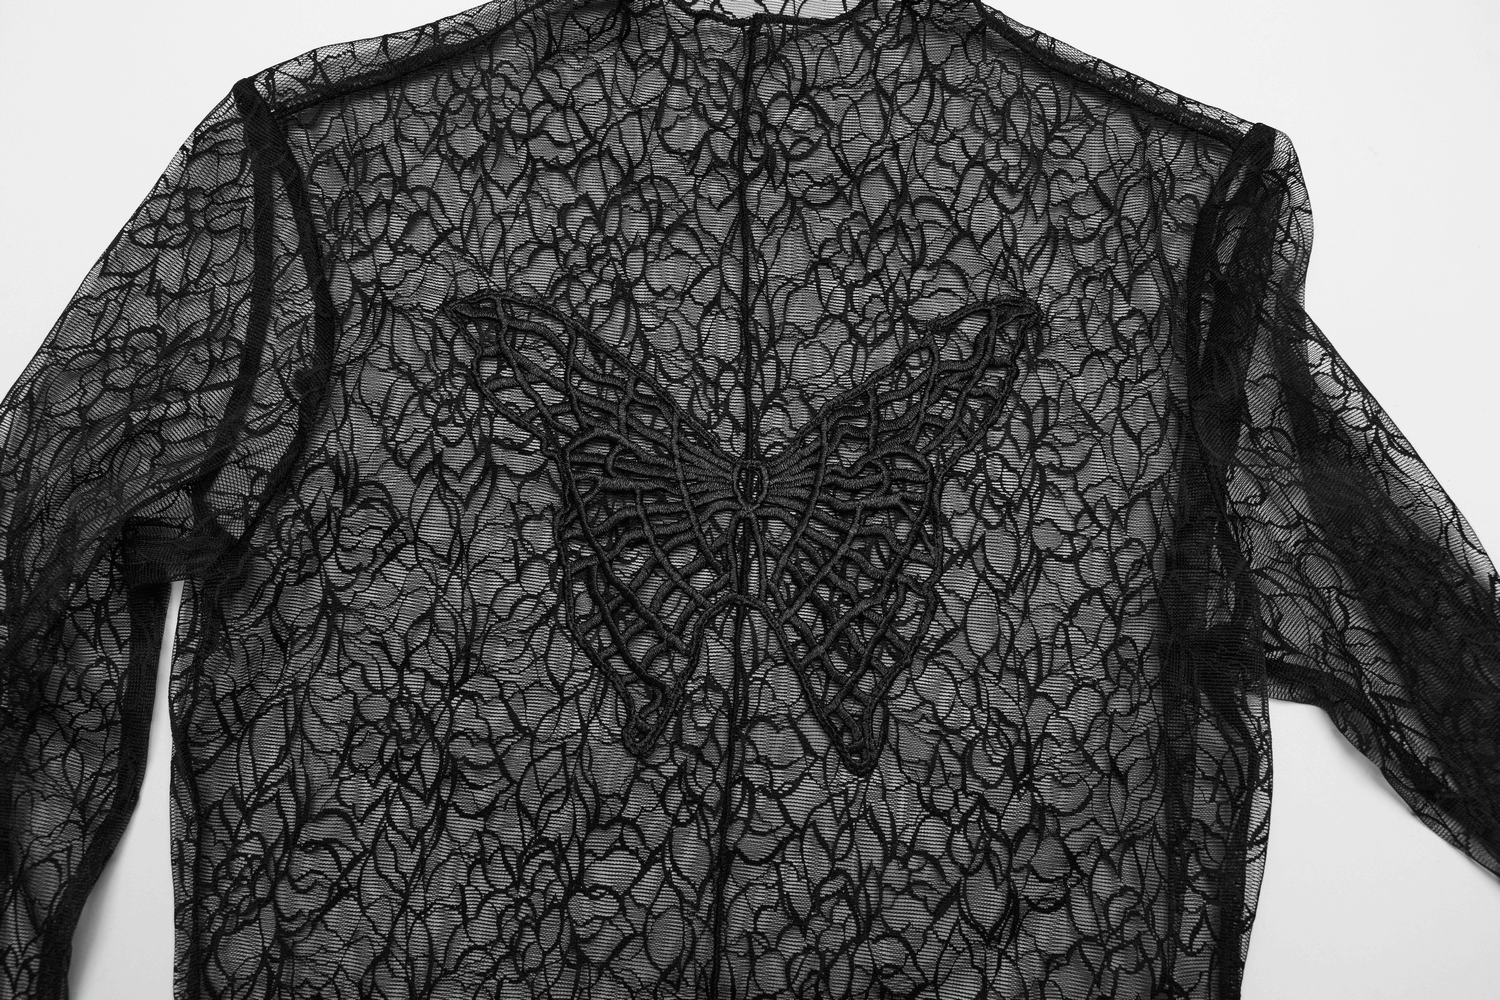 Black Gothic Mesh Butterfly Long Sleeve Crop Top